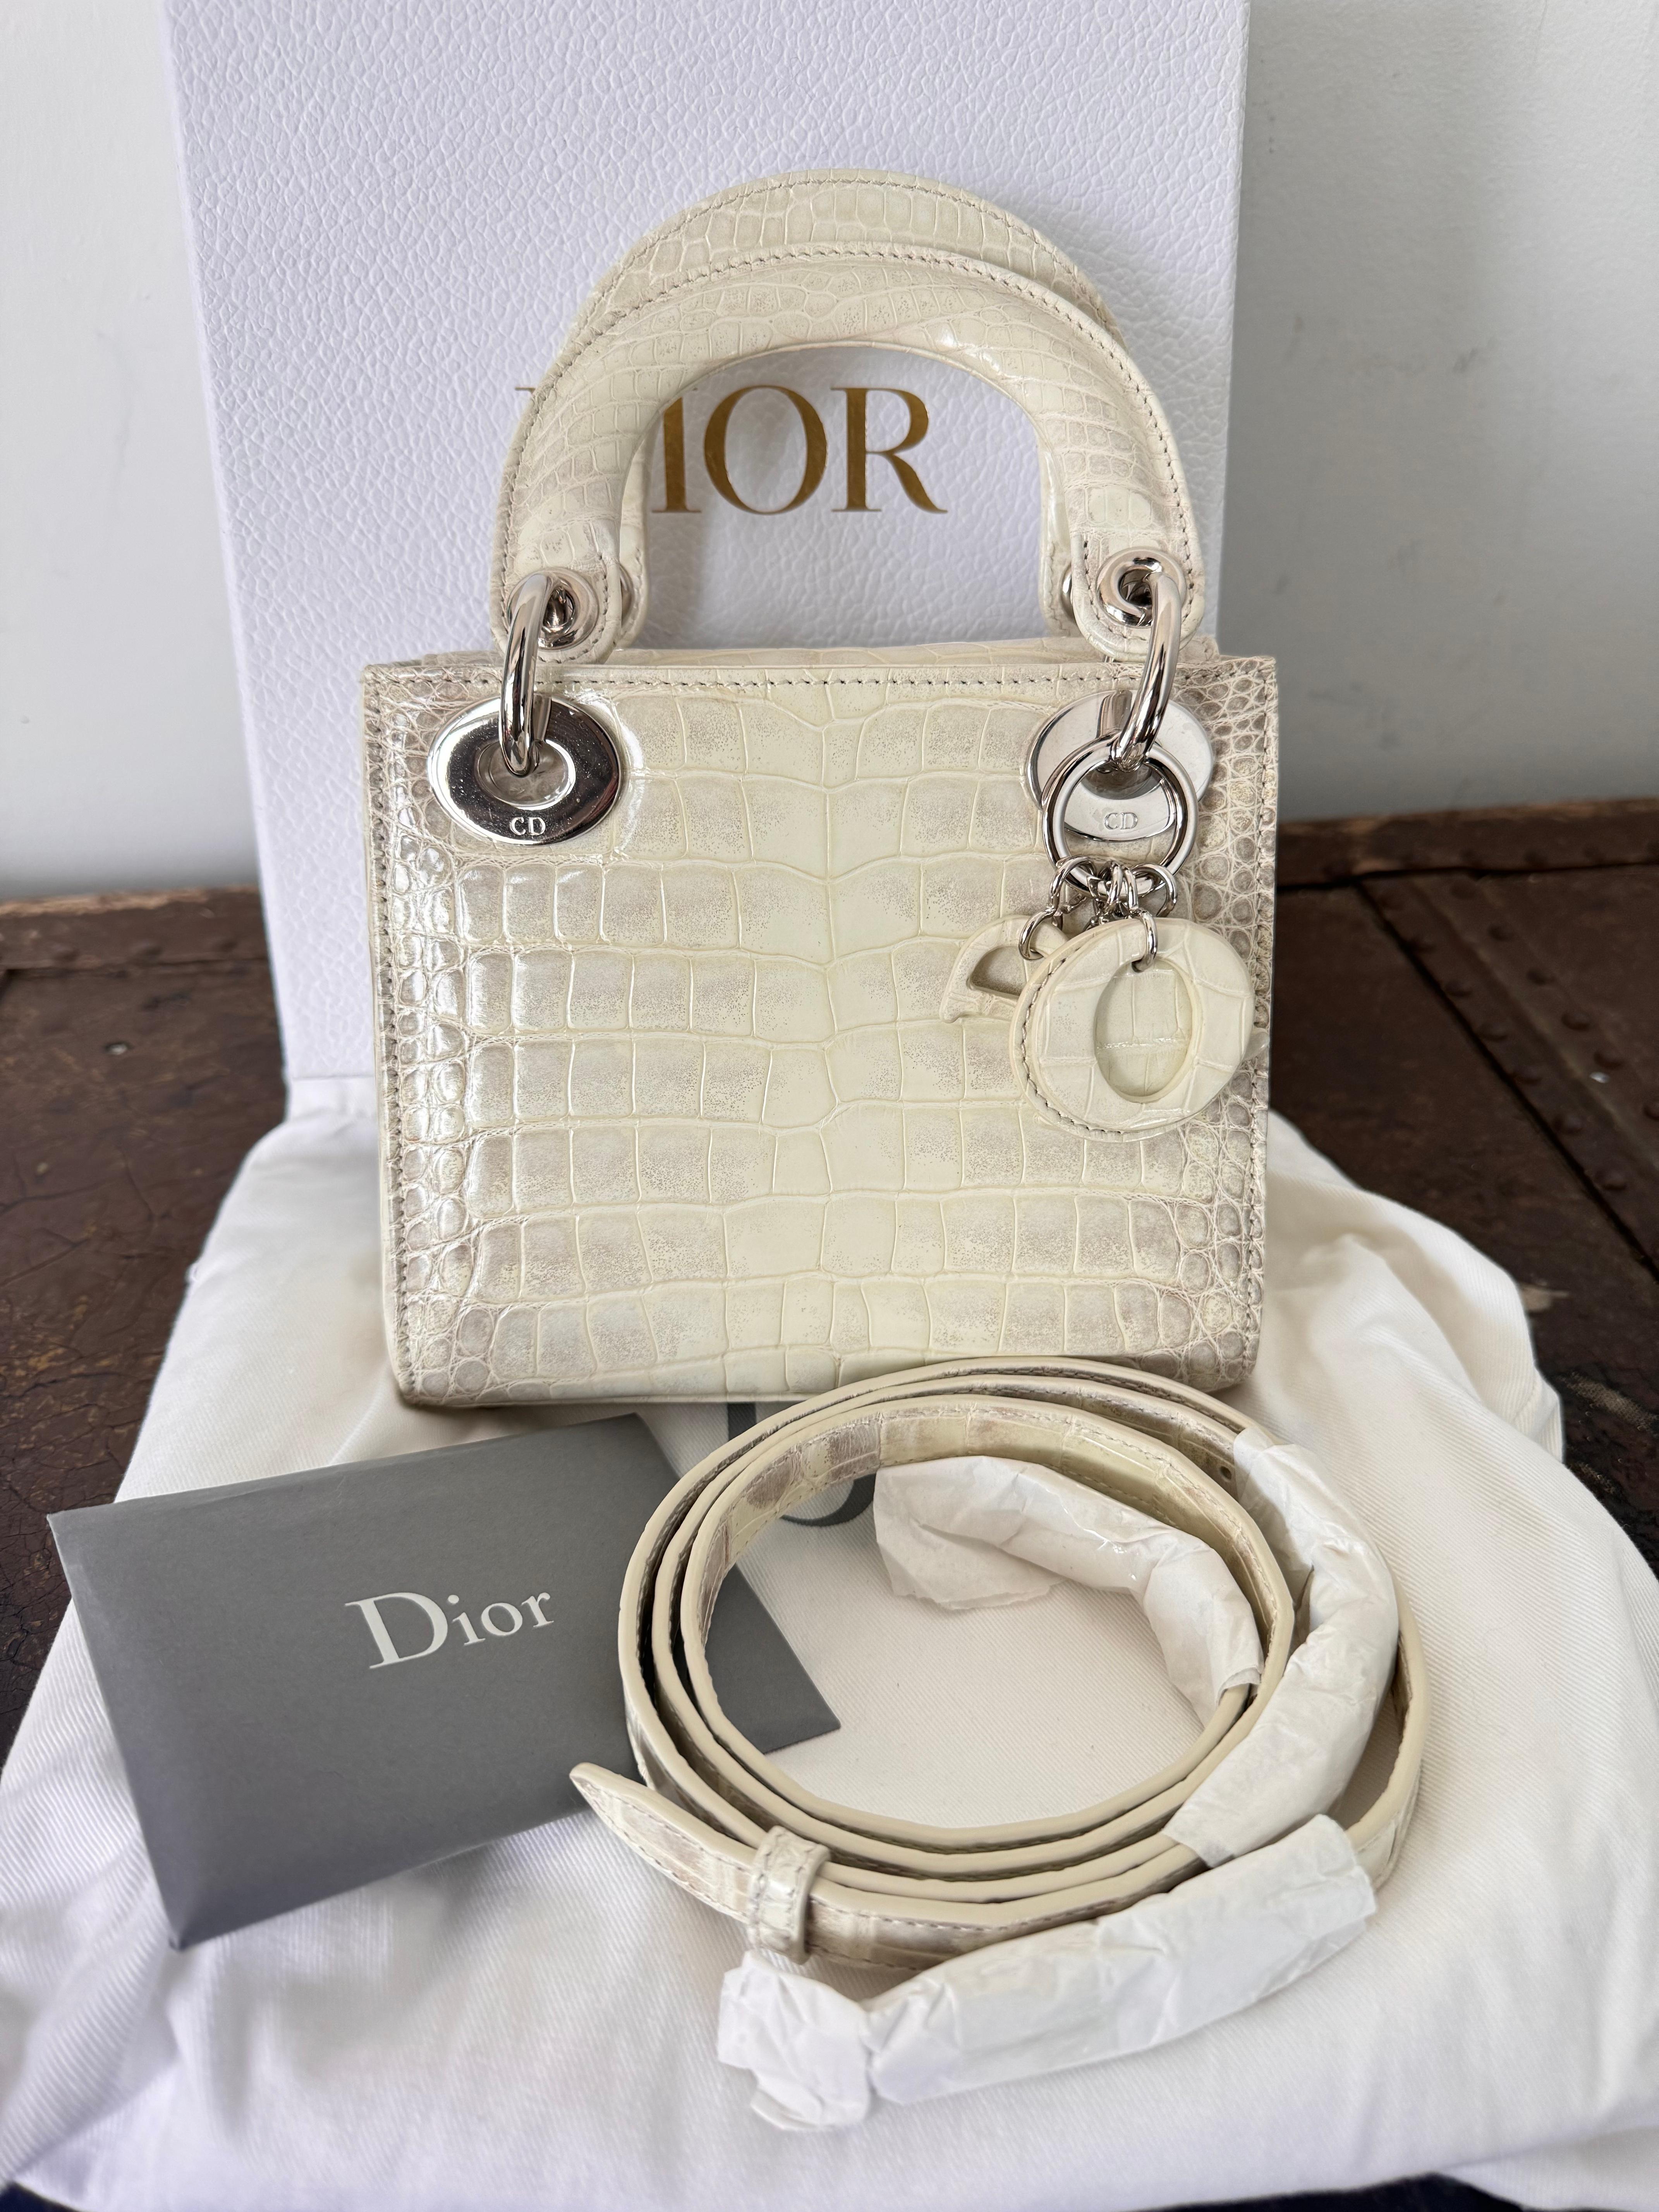 This exquisite Christian Dior Himalaya Mini Lady Dior bag is a paragon of luxury and sophistication, meticulously crafted to stand as a timeless piece in any collection. It is brand new, never worn, and comes impeccably packaged in its original box,